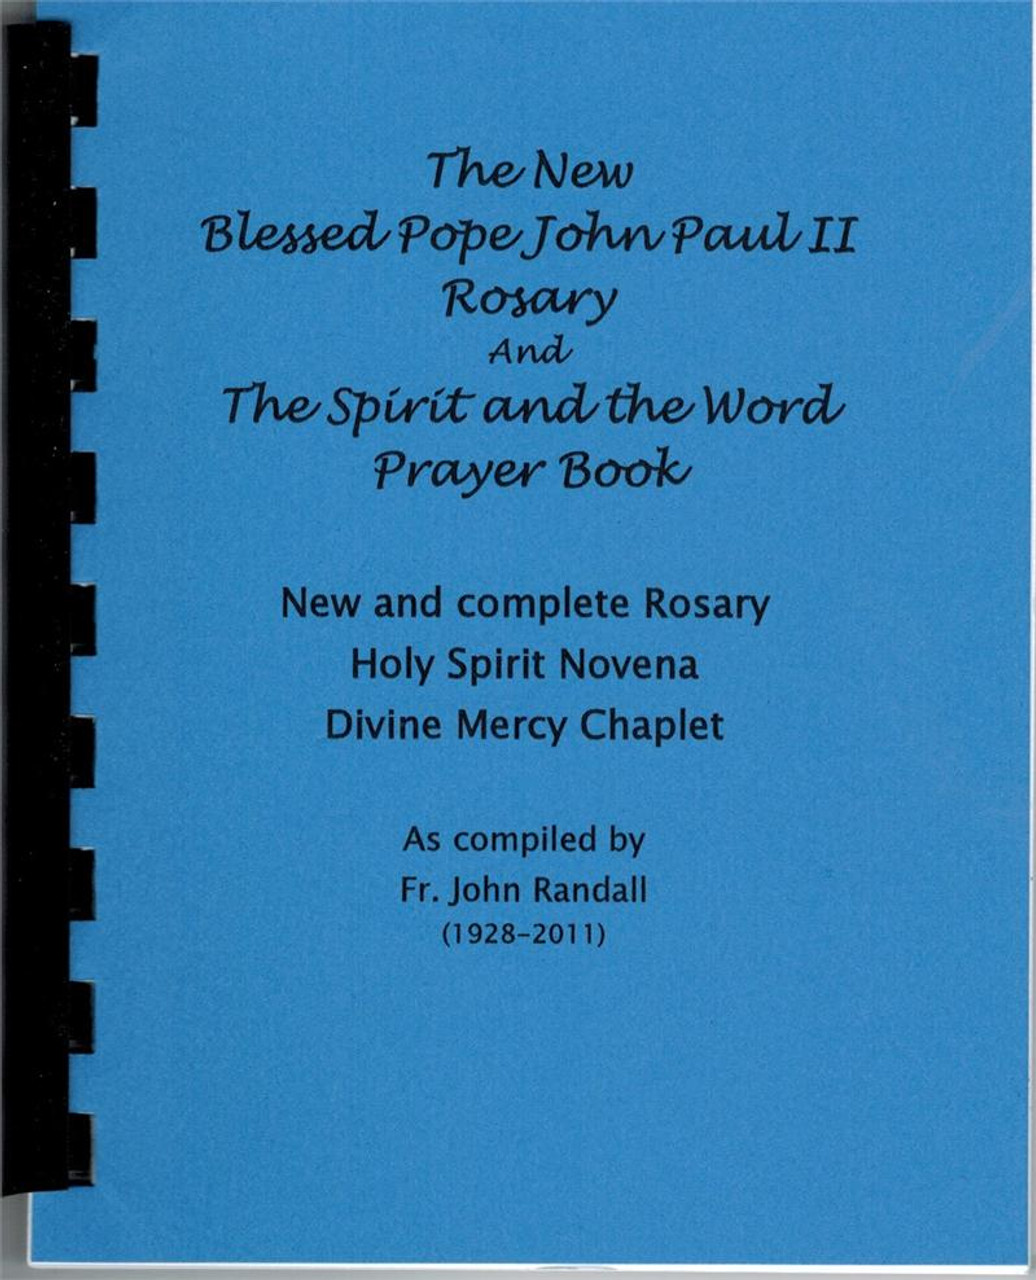 The New Pope John Paul II Rosary and The Spirit and the Word Prayer Book